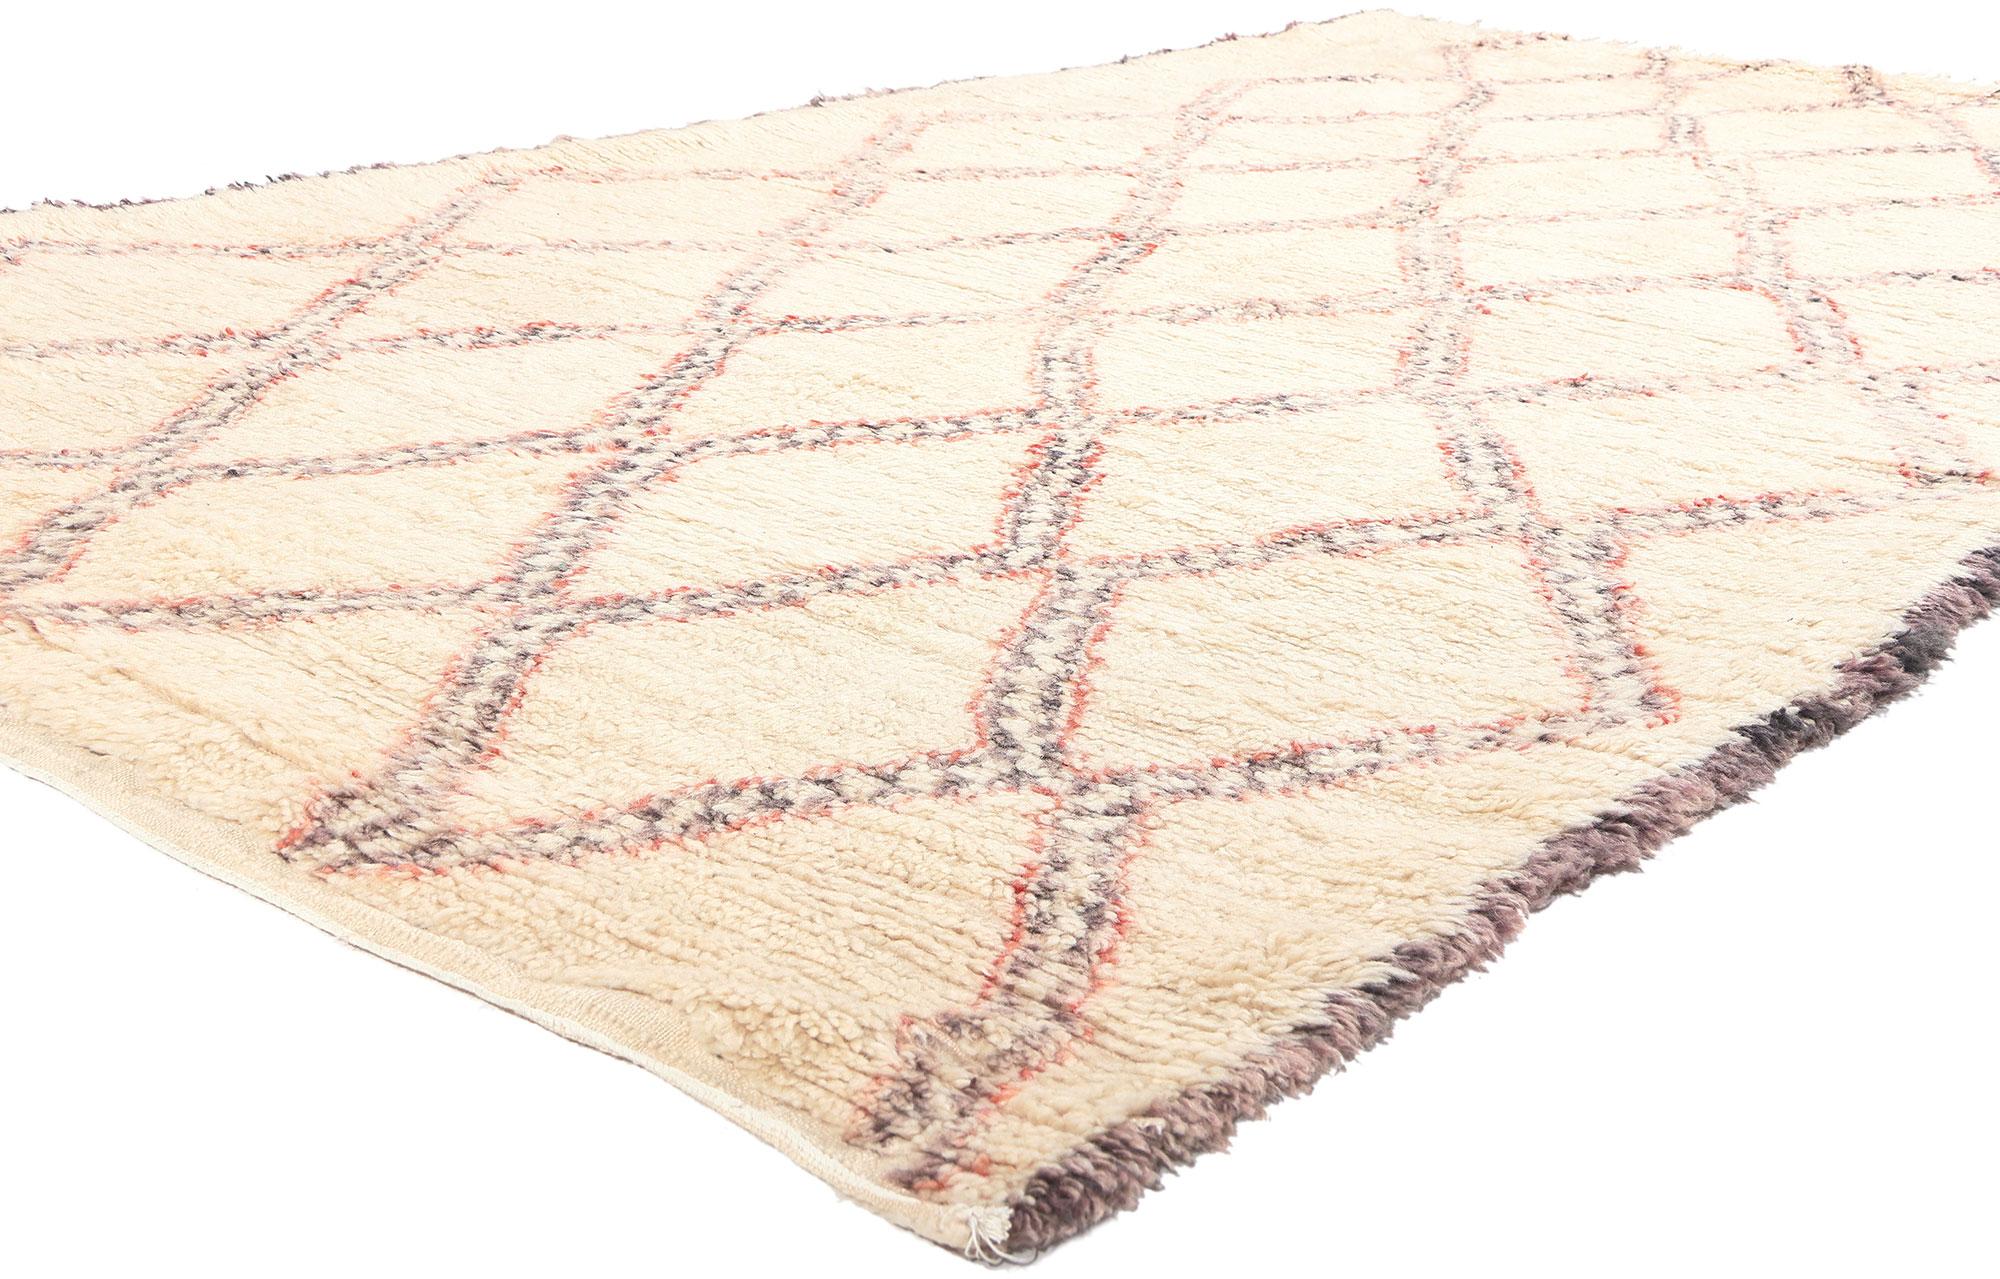 74512 Vintage Beni Ourain Moroccan Rug, 05'09 x 10'00. 
Crafted with precision and care, Beni Ourain rugs are meticulously hand-woven by the skilled women of the Beni Ourain and various Berber tribes nestled in the North-Eastern Middle Atlas